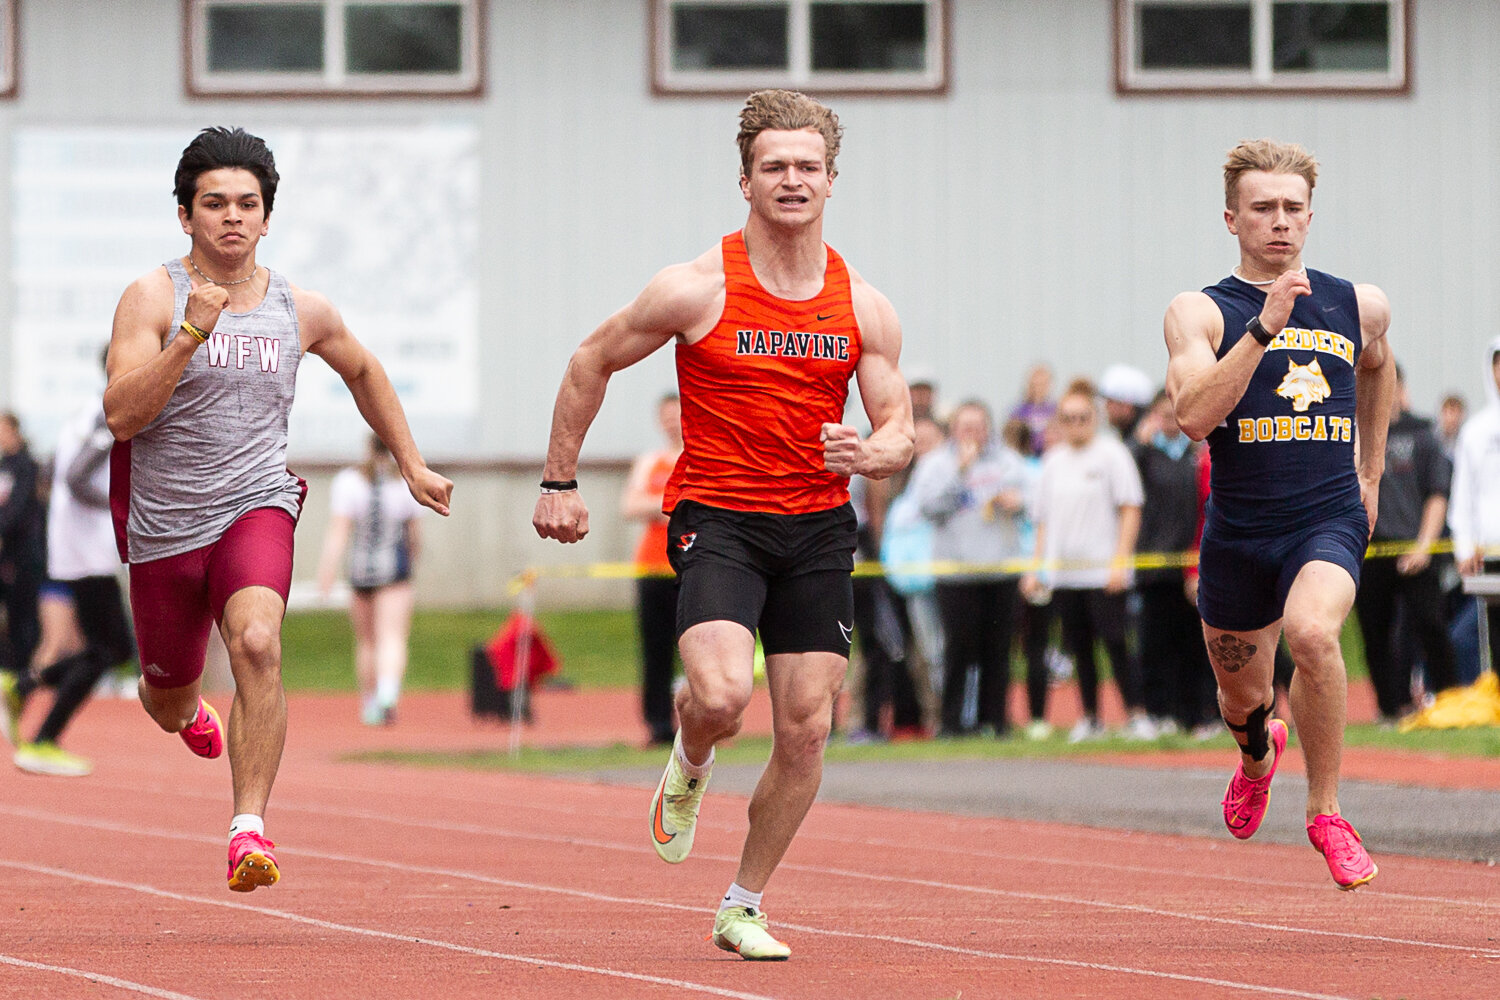 Napavine's Max O'Neill competes in the 100-meter dash at the Chehalis Activators Classic April 22 at W.F. West.